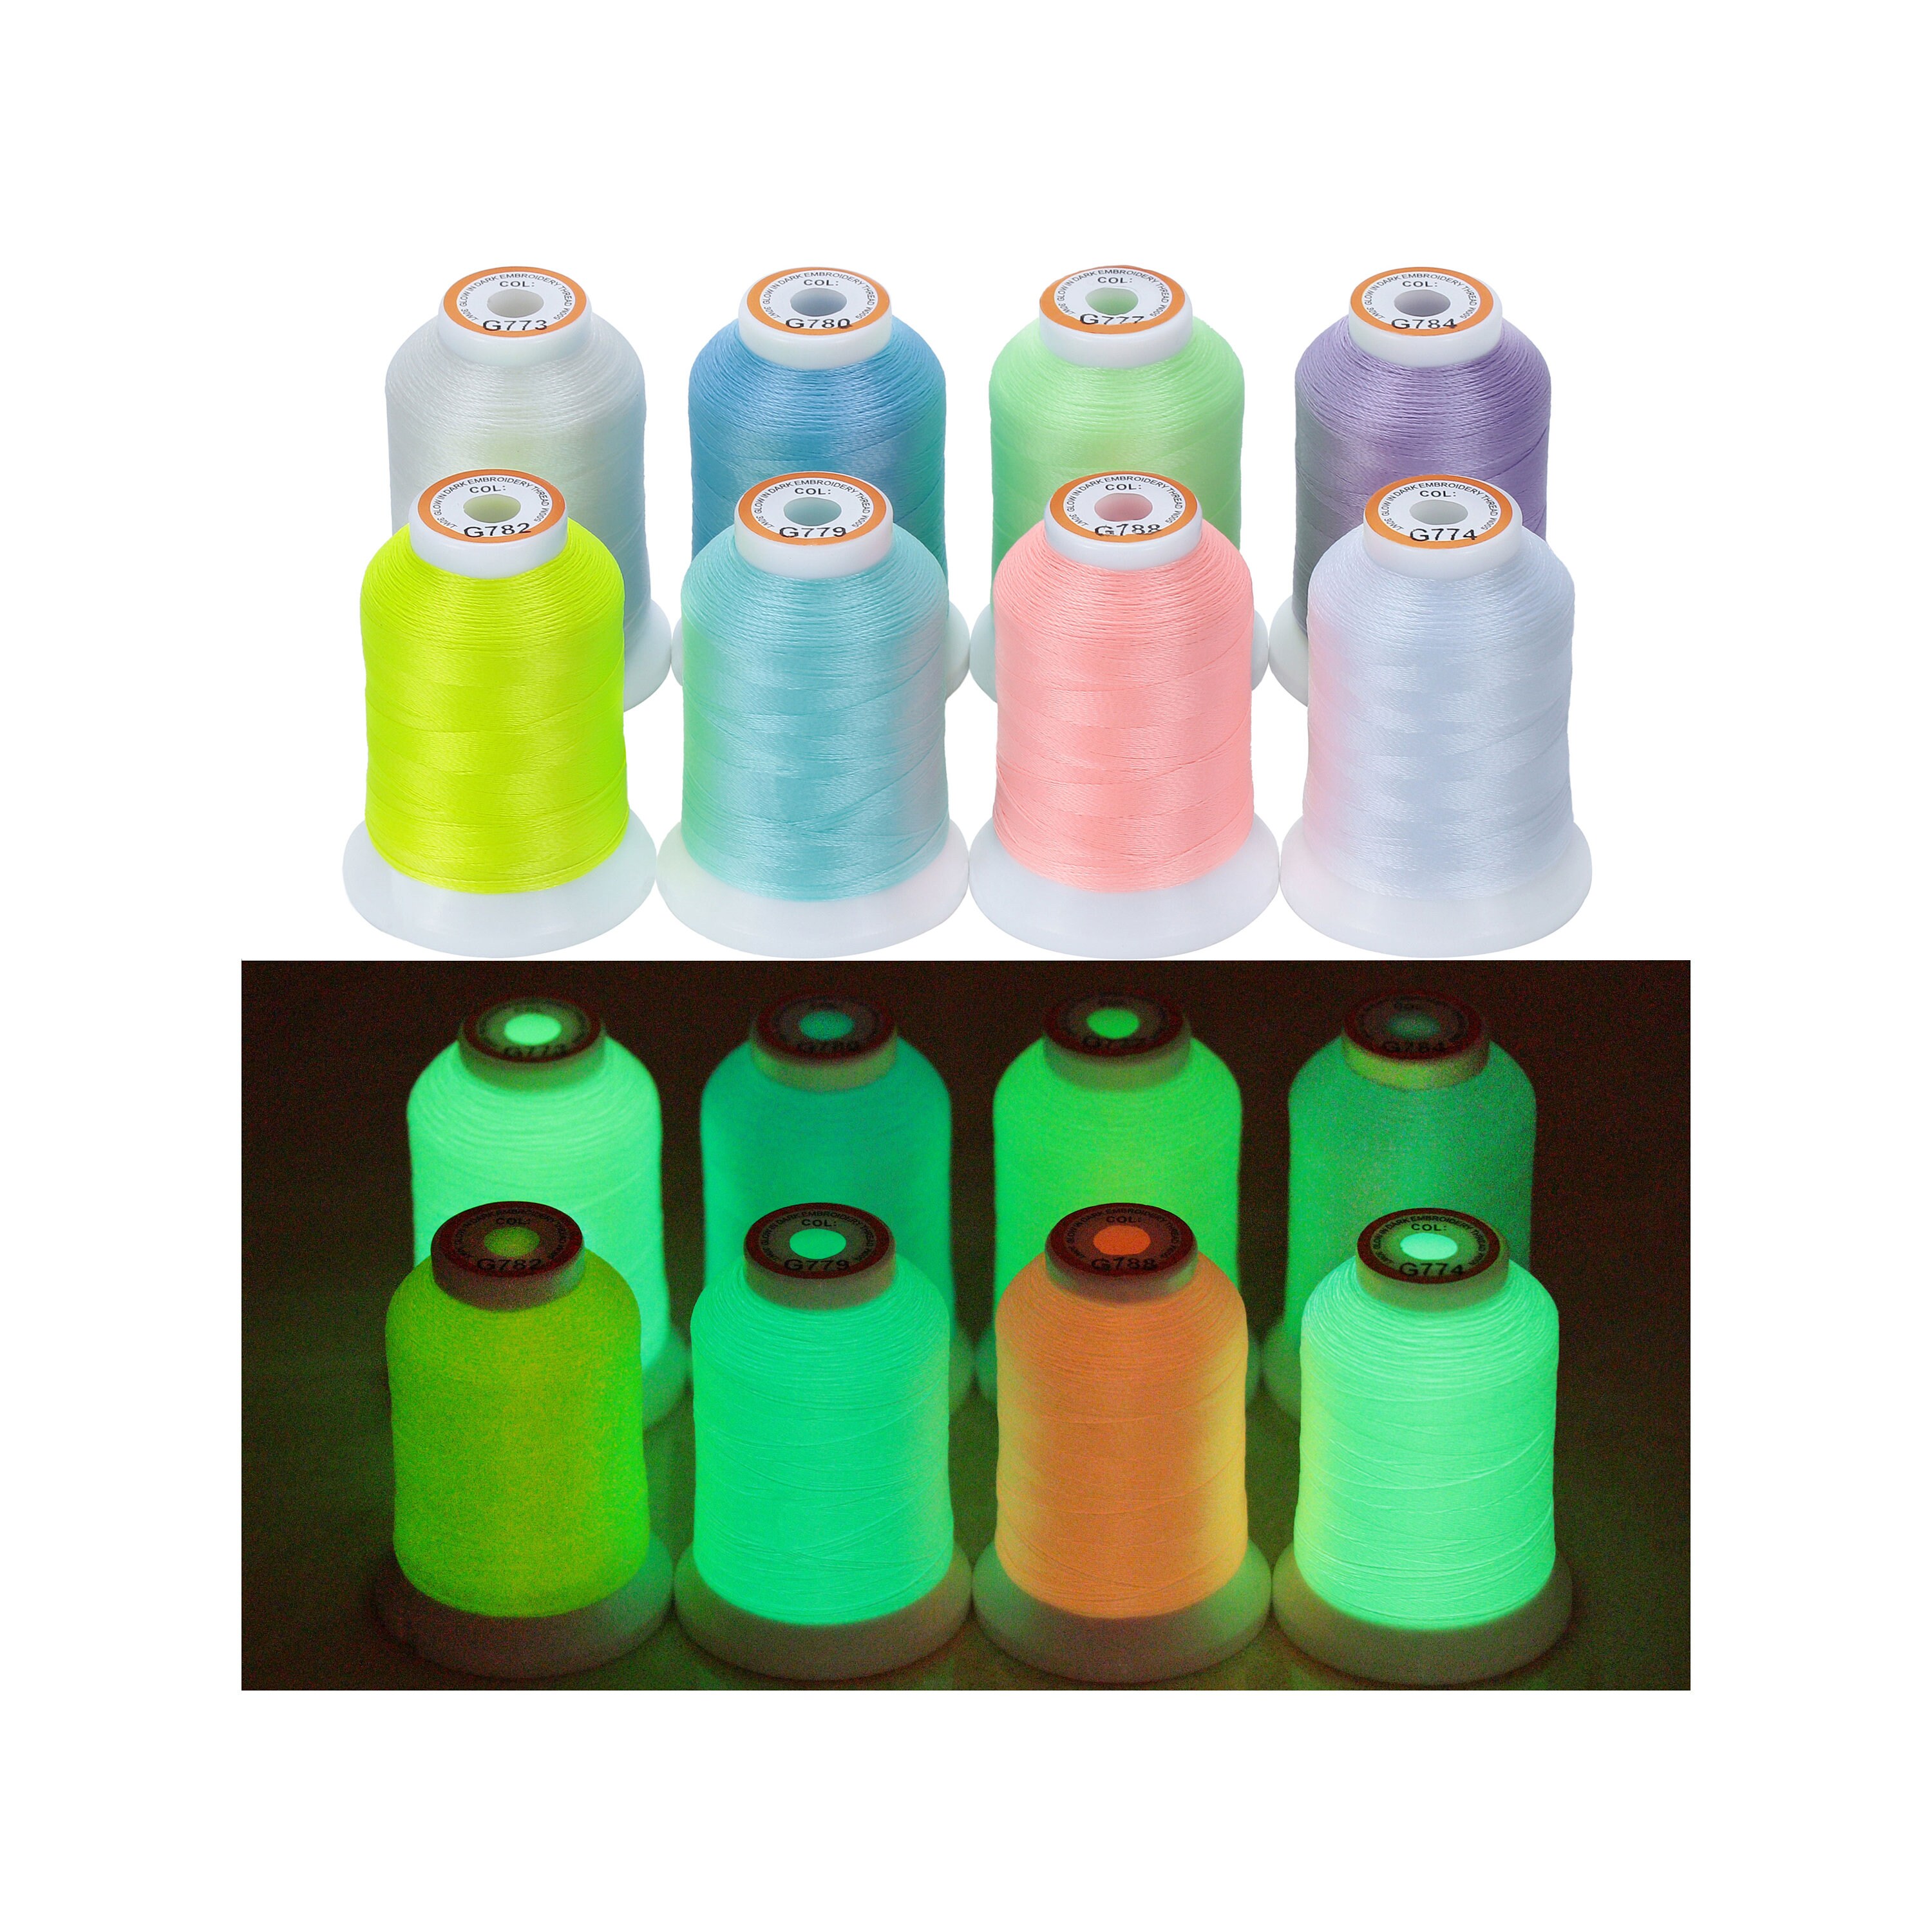 Healifty 5pcs Glow in The Dark Sewing Thread Embroidery Thread Luminous Thread for Cross-Stitch Bag Sewing Craft 